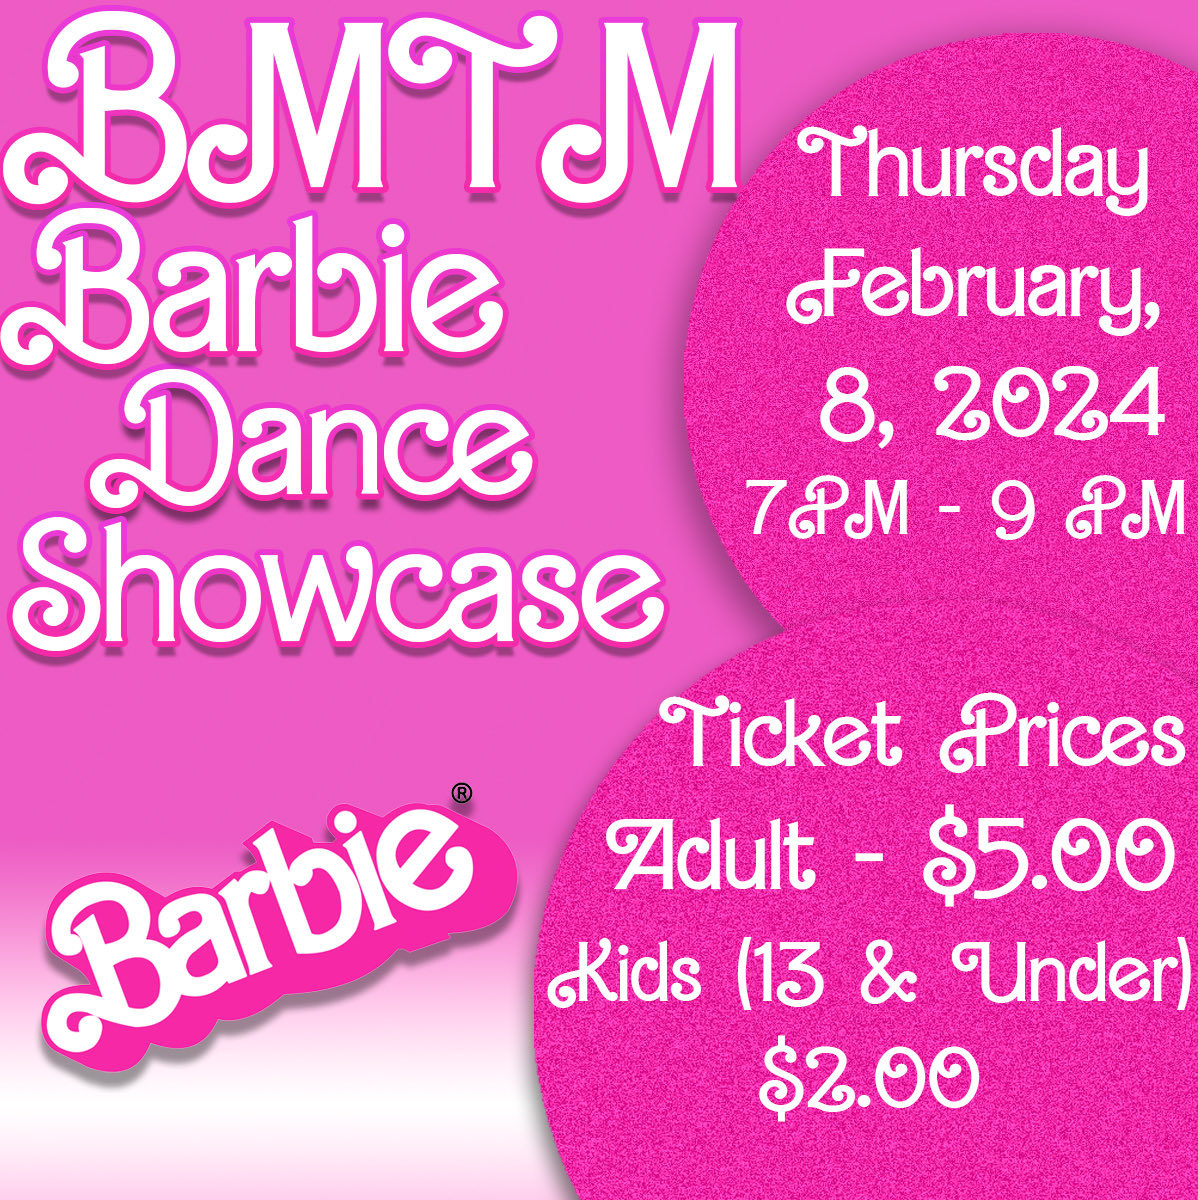 The Barbie Dance Showcase is Tonight! See you there!! 💃🏽 🪩 🕺